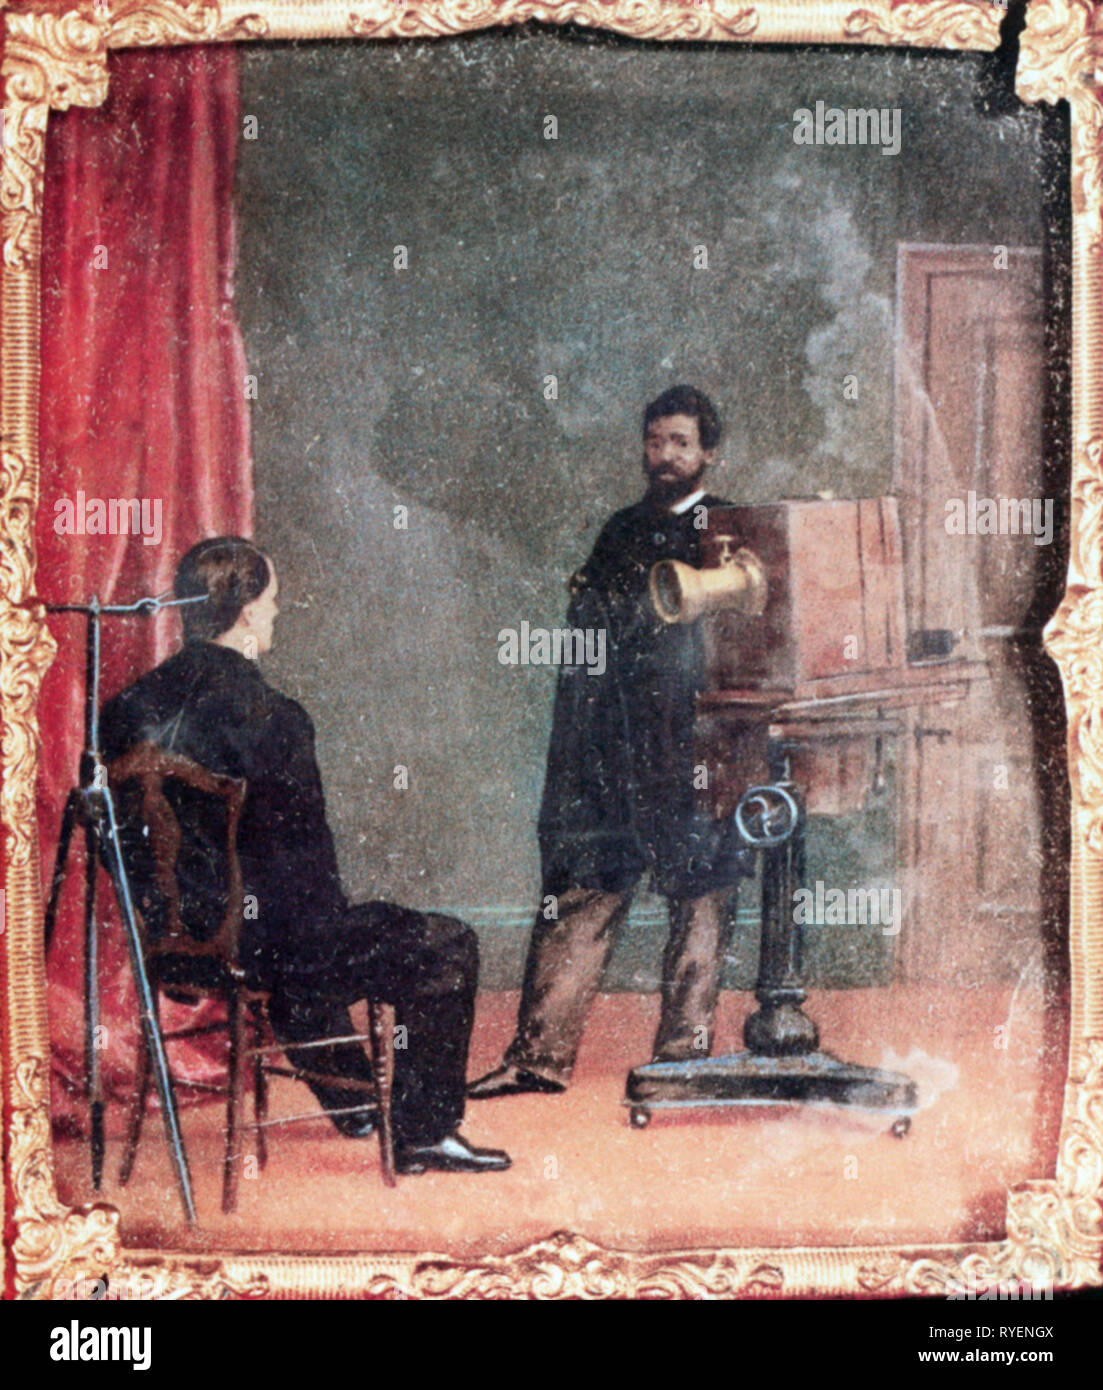 photography, photographers, photographer and sitter, painted daguerreotype, 19th century, 19th century, photographer's studio, photographer's salon, studio, atelier, artist's workroom, ateliers, artist's workrooms, studios, occupation, occupations, tripod, tripods, standing, sitter, pose, chair, chairs, sitting, sit, rest, support, rests, supports, headrest, head restraint, headrests, active head restraints, photo camera, camera, cameras, photographer, photographers, painting, paint, daguerreotype, daguerrotype, historic, historical, man, men, ma, Additional-Rights-Clearance-Info-Not-Available Stock Photo